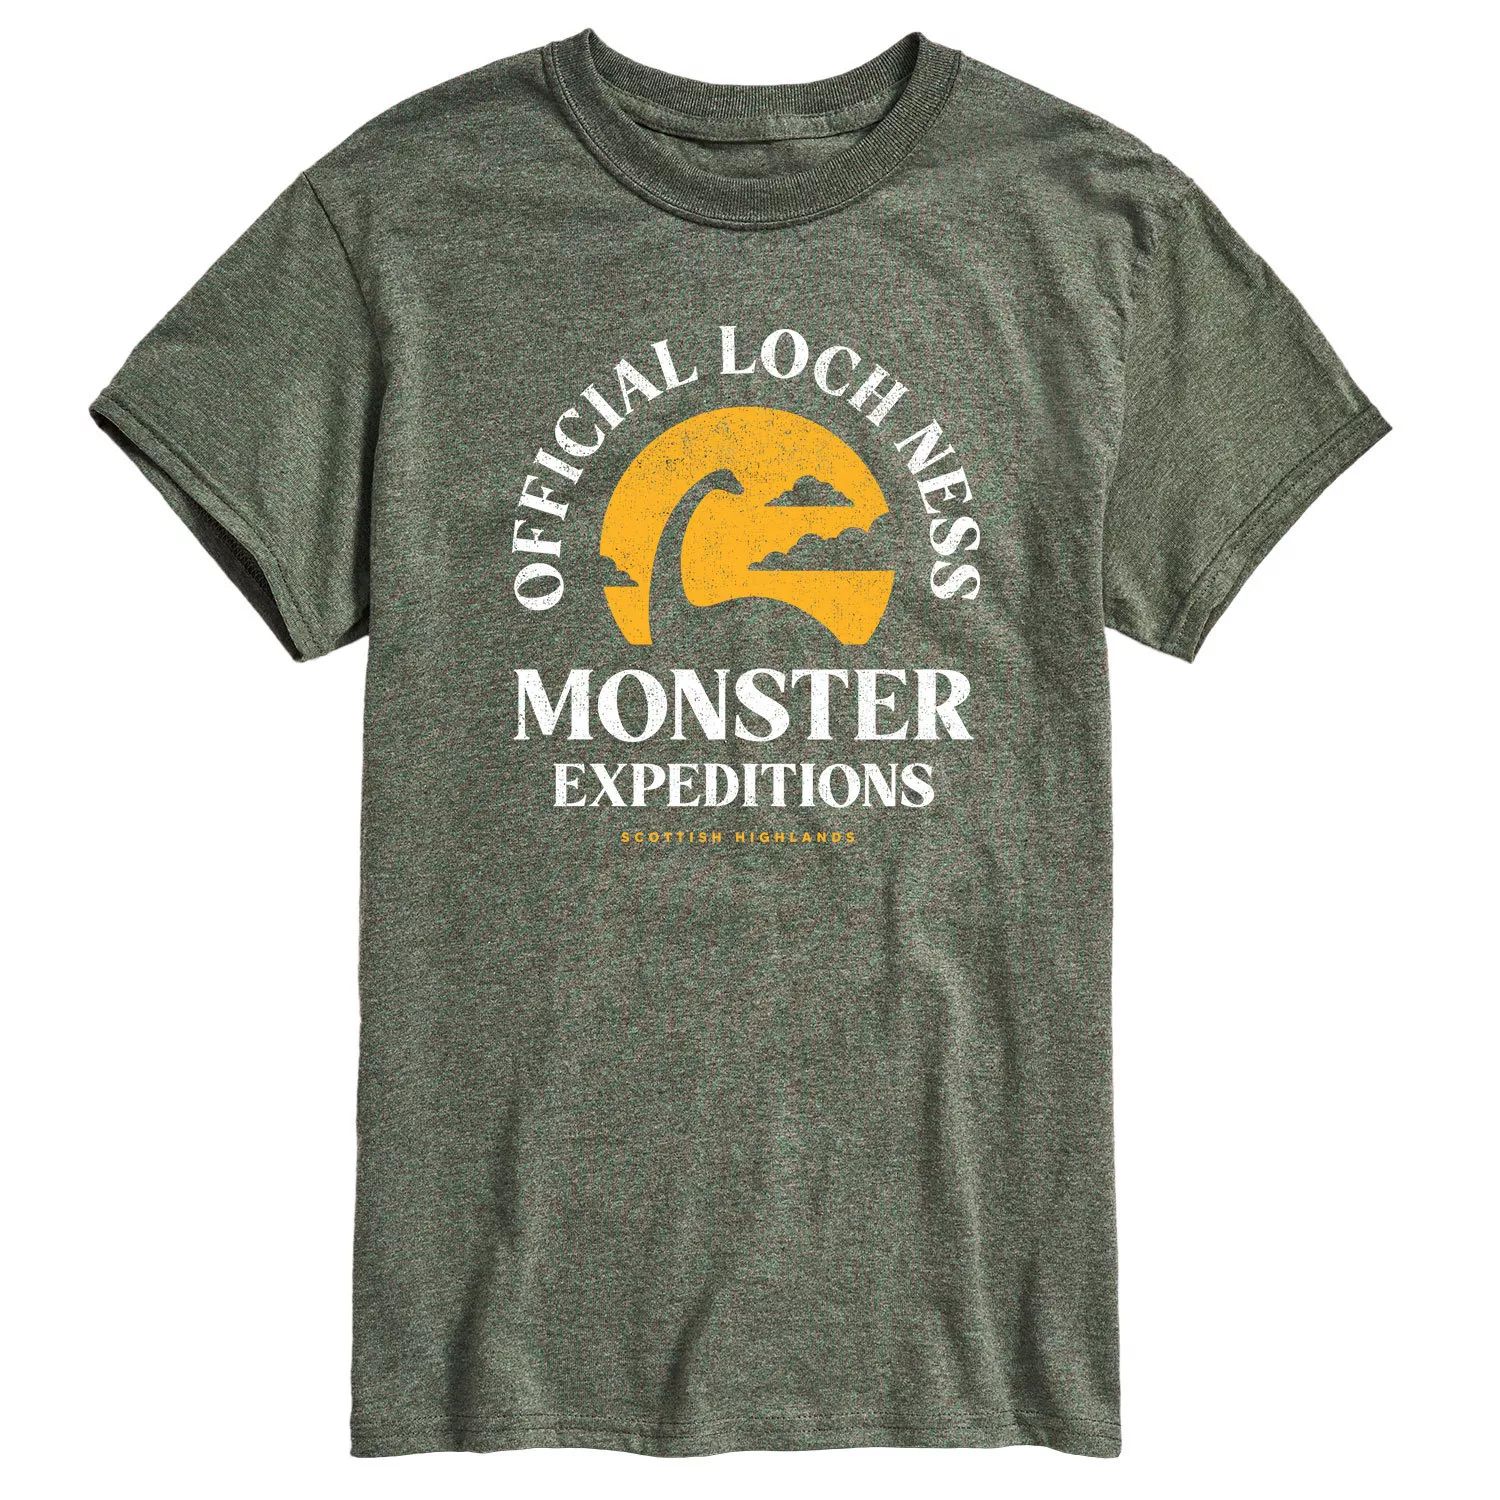 Мужская футболка Loch Ness Monster Expeditions Licensed Character de saulles tony the loch ness monster spotters